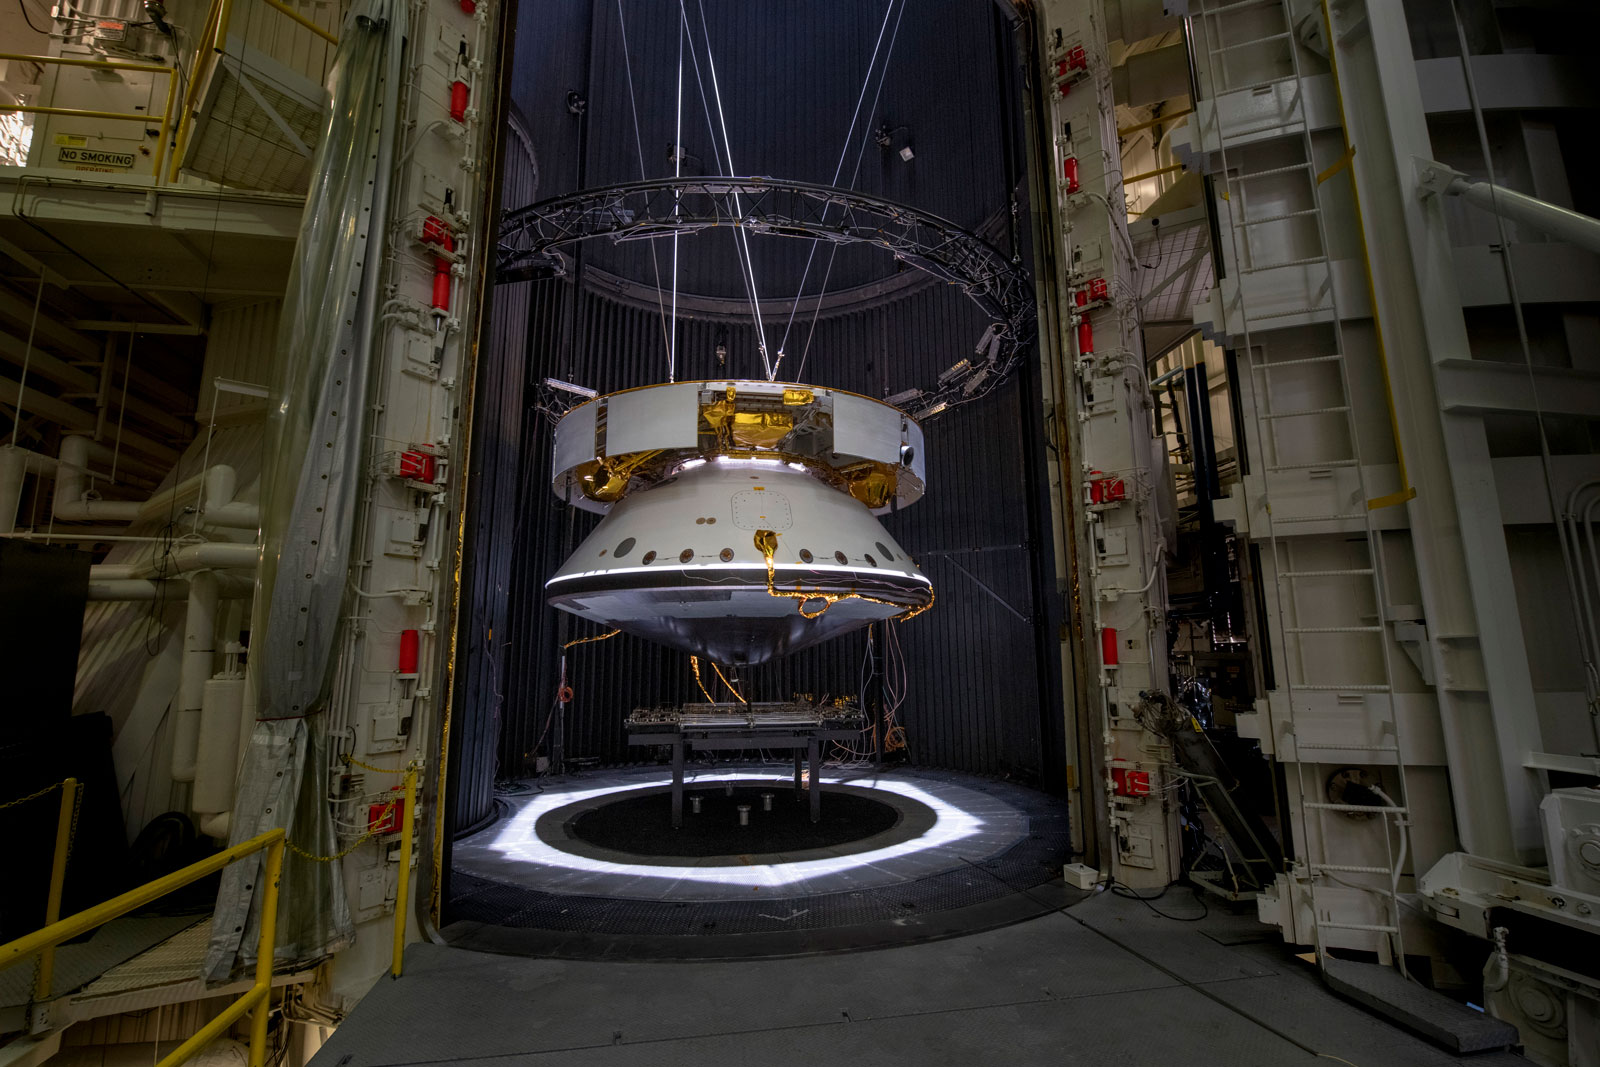 The completed spacecraft that will carry the Mars 2020 rover to the Red Planet, next year hangs suspended by cables inside the Space Simulator Facility at NASA's Jet Propulsion Laboratory in Pasadena, California. The image was taken on May 9, 2019.